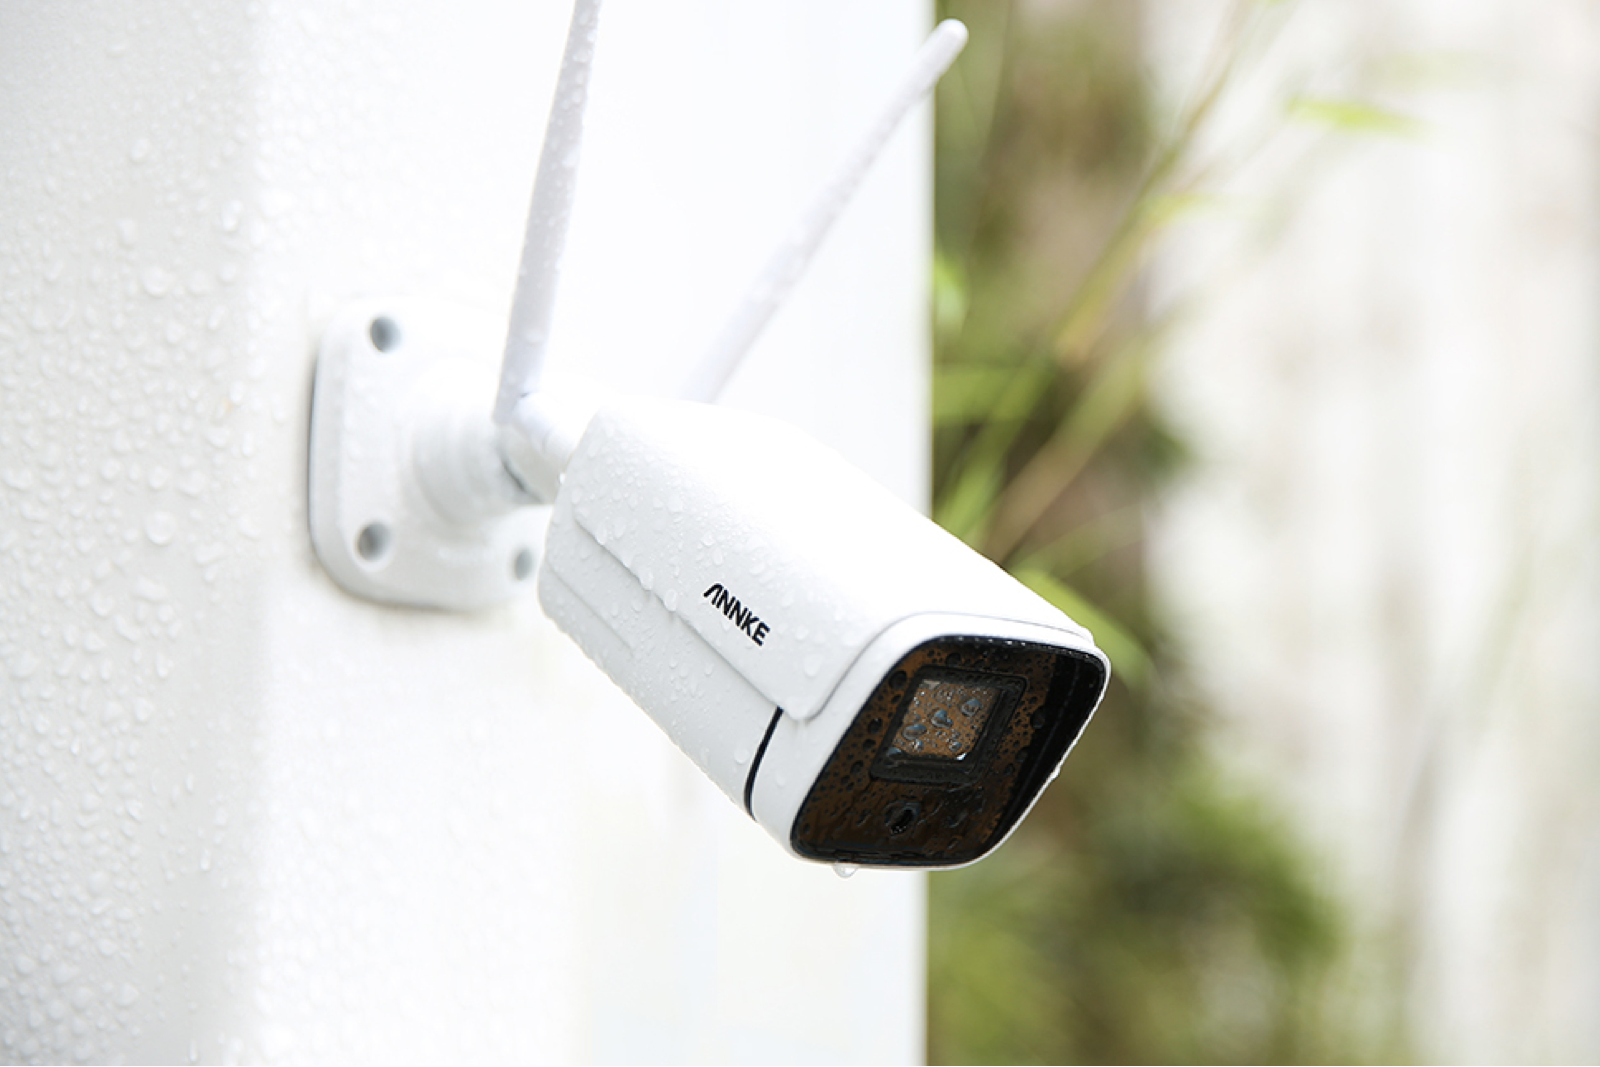 Annke home security deals for Prime Day photo 28